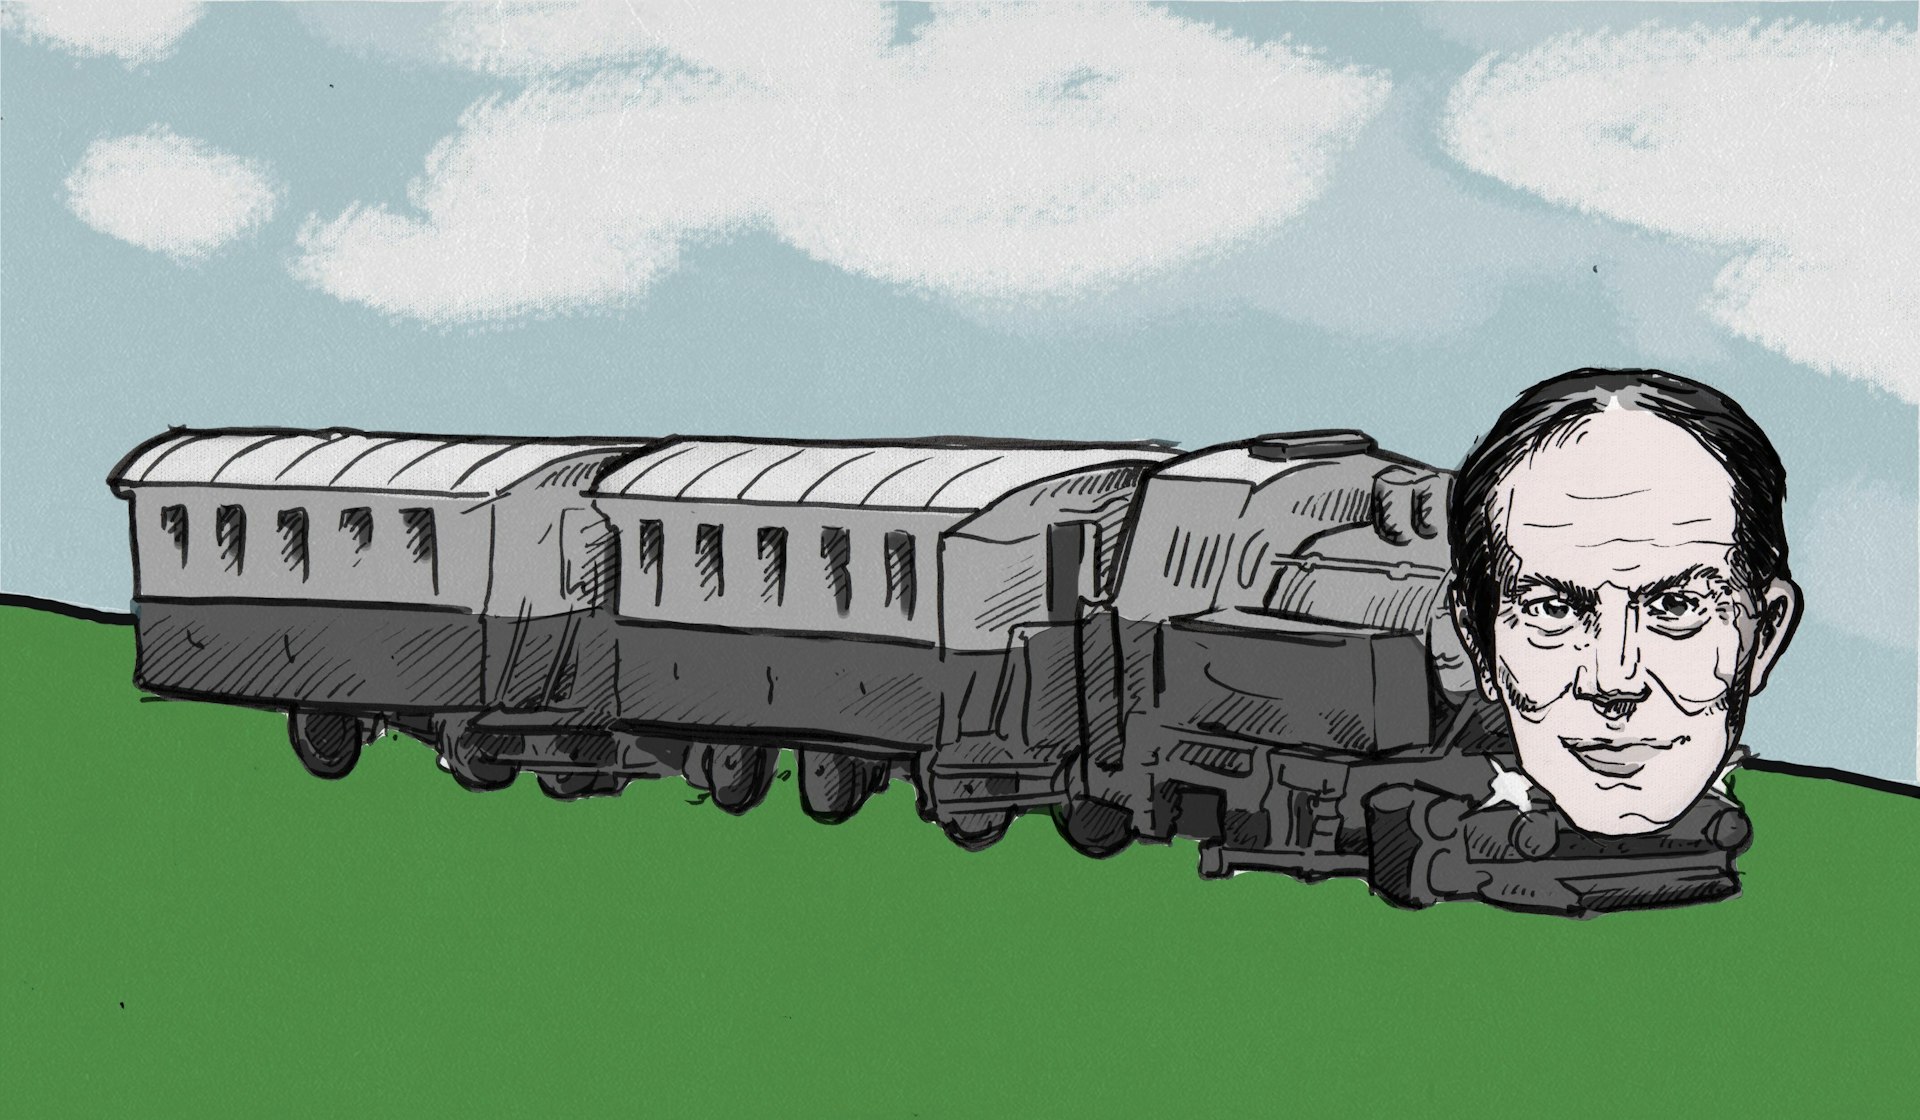 The curious case of the centrist and the train